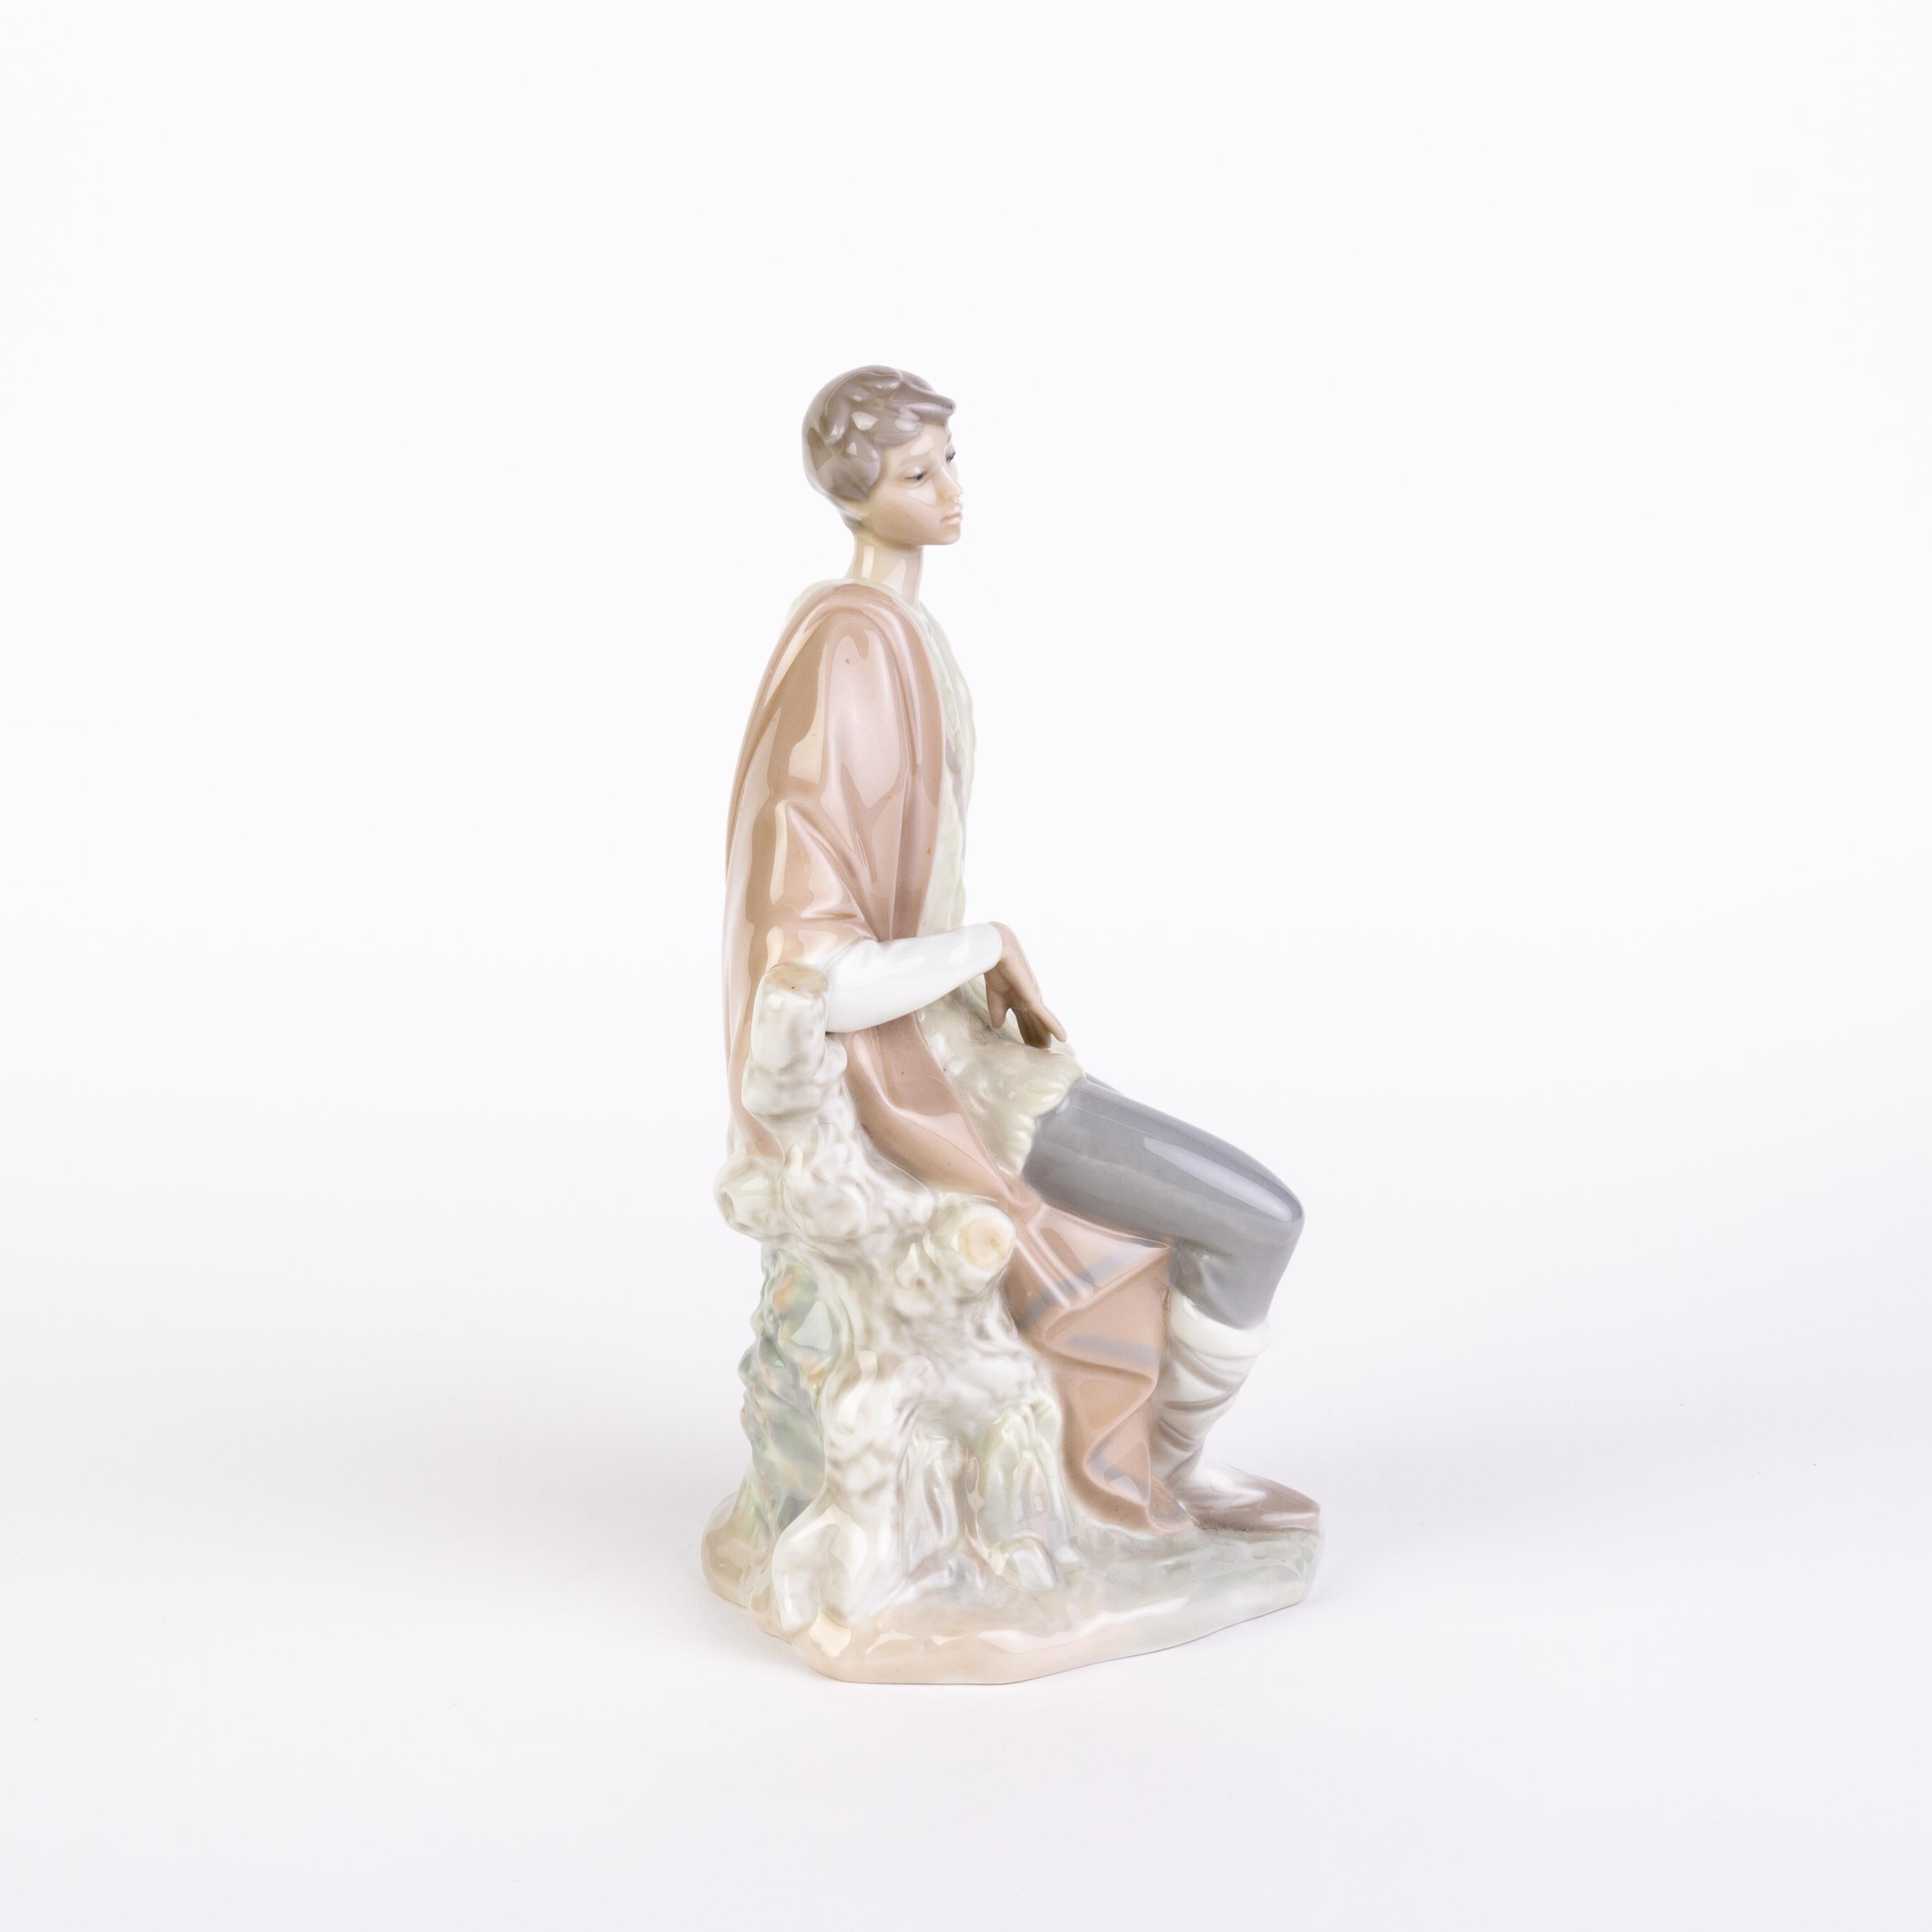 Retired Lladro Fine Porcelain Sculpture Figure Seated Gentleman 
Good condition
From a private collection.
Free international shipping.